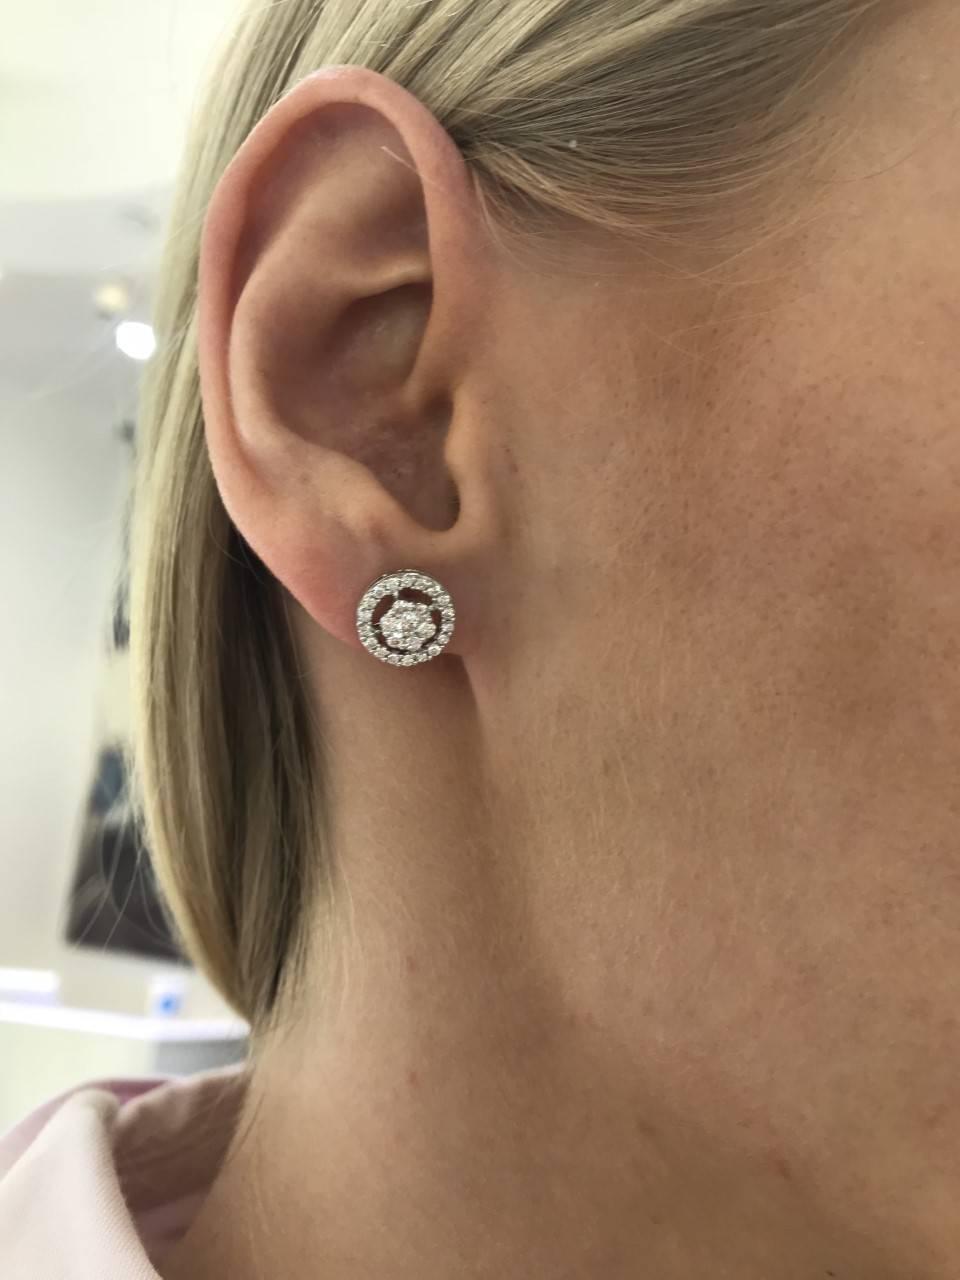 These eye catching sparkling Round Brilliant Diamond cluster stud earrings featuring H-SI Diamonds, set in 18 Karat White Gold. These mini cluster studs have an exquisite circular halo and a total diamond weight of 0.75 Carats and a measurement of